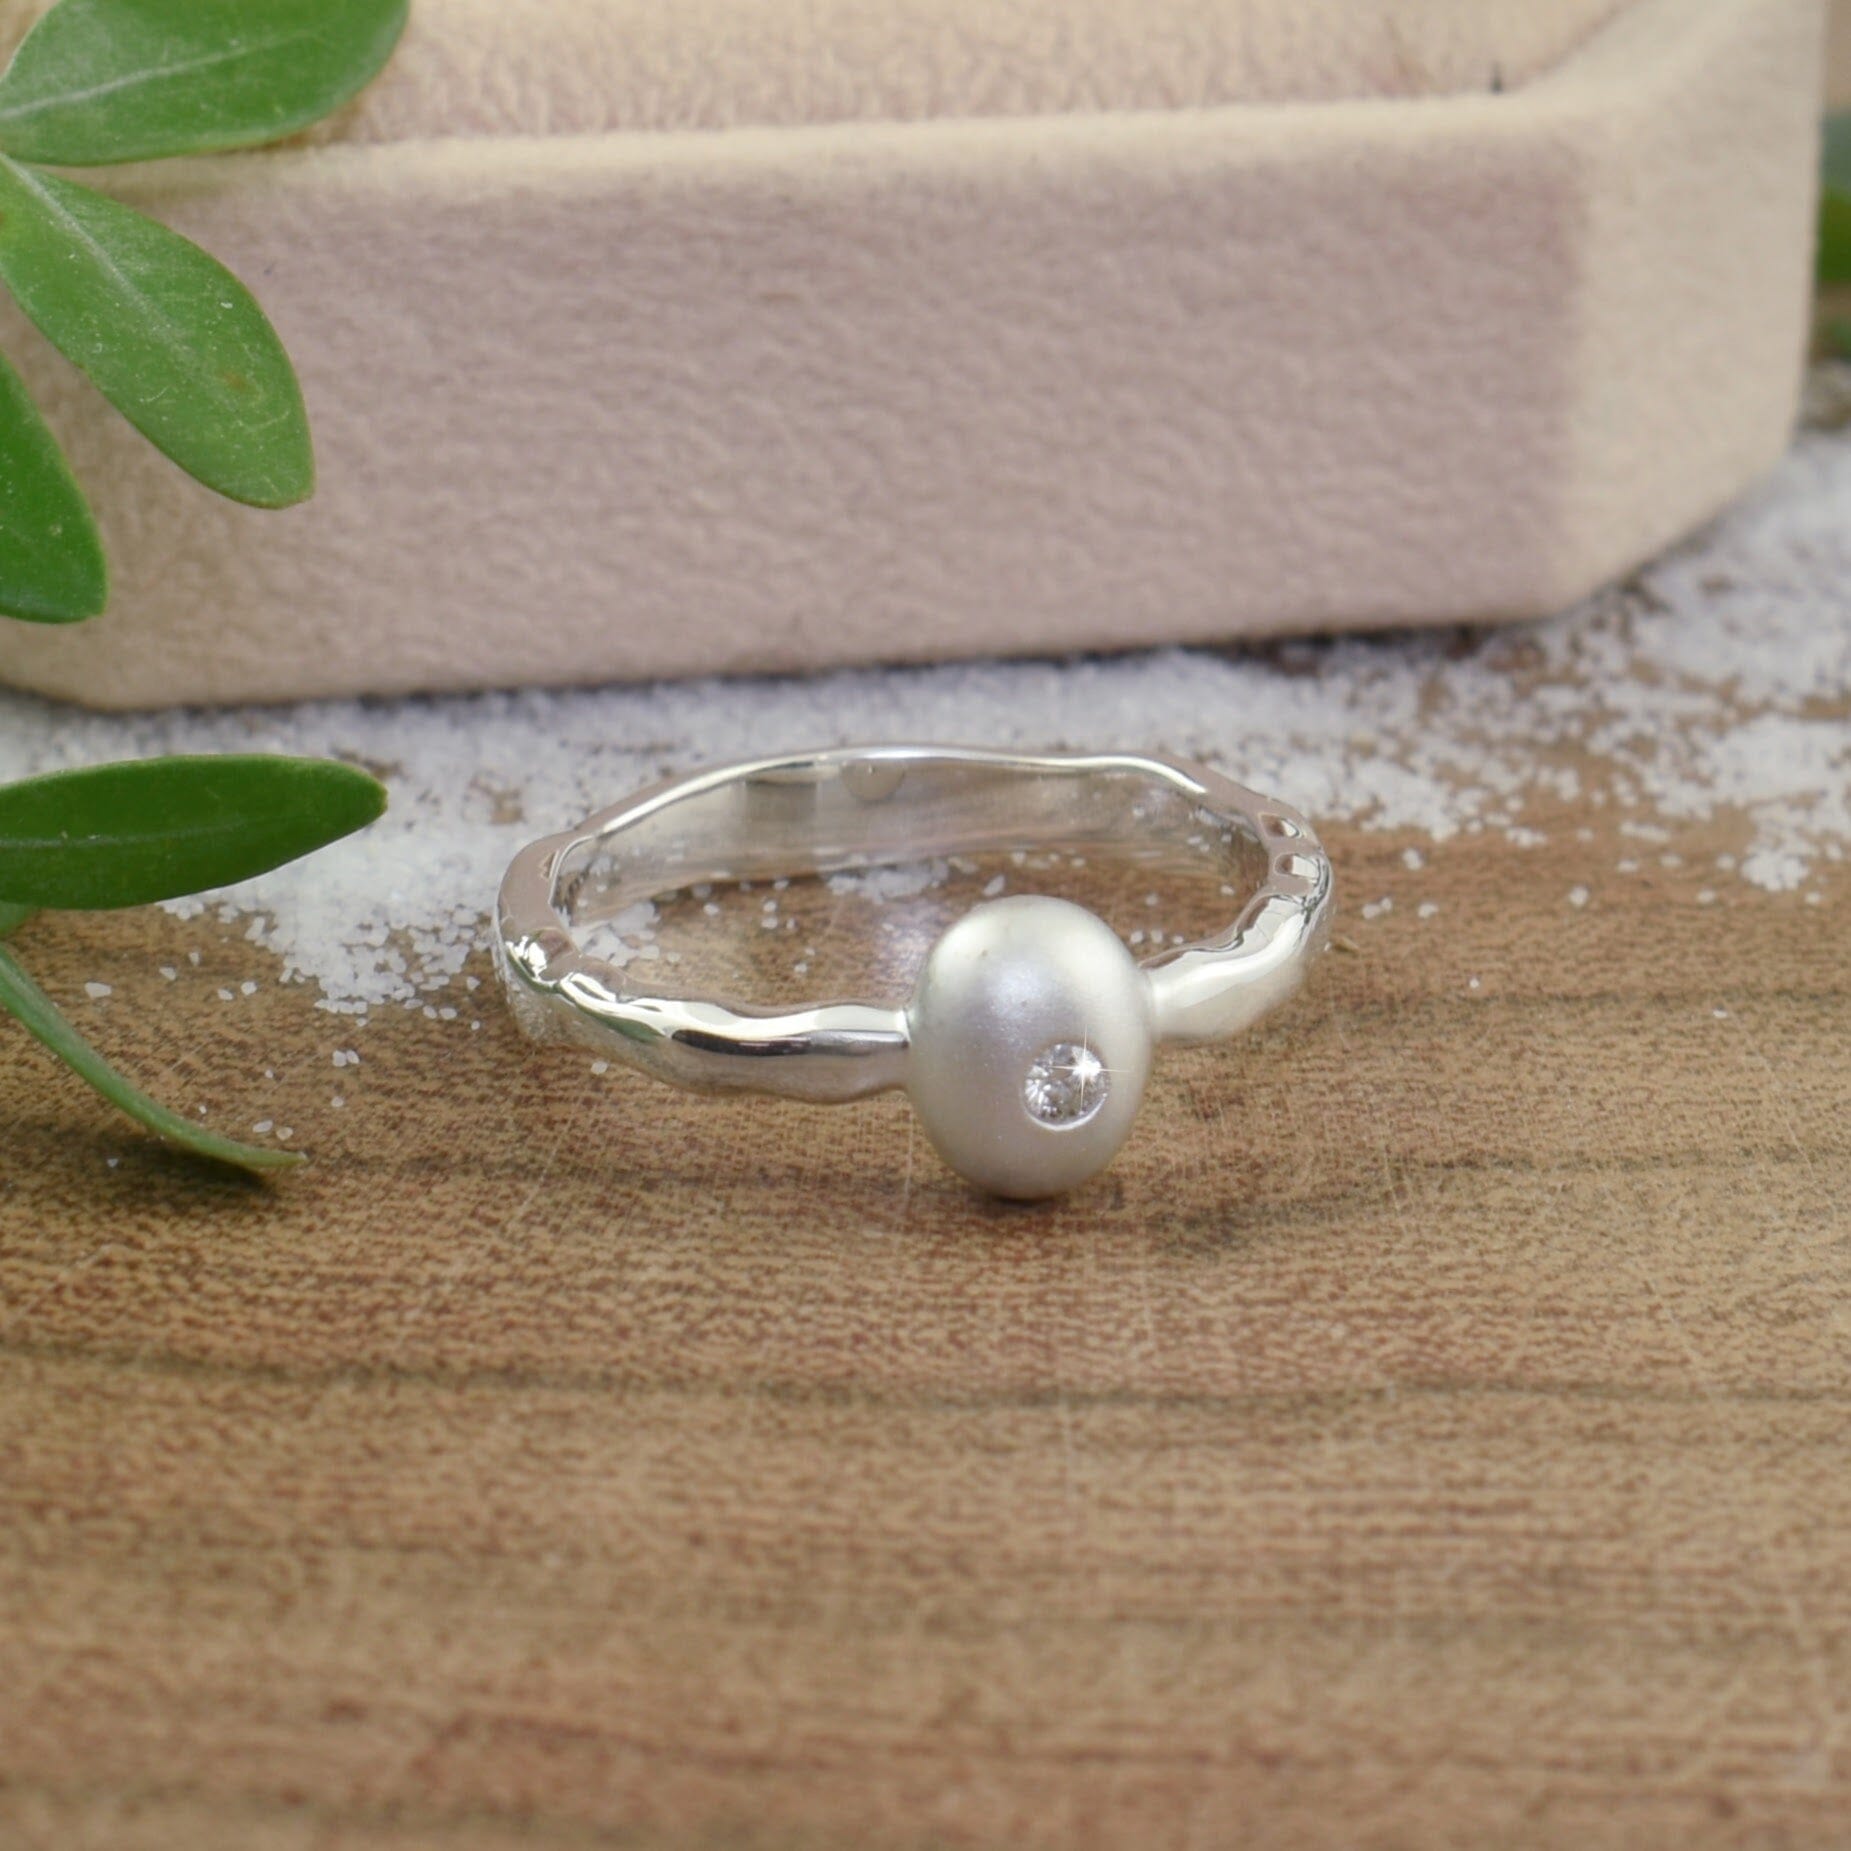 dainty .925 sterling silver ring featuring a tiny diamond